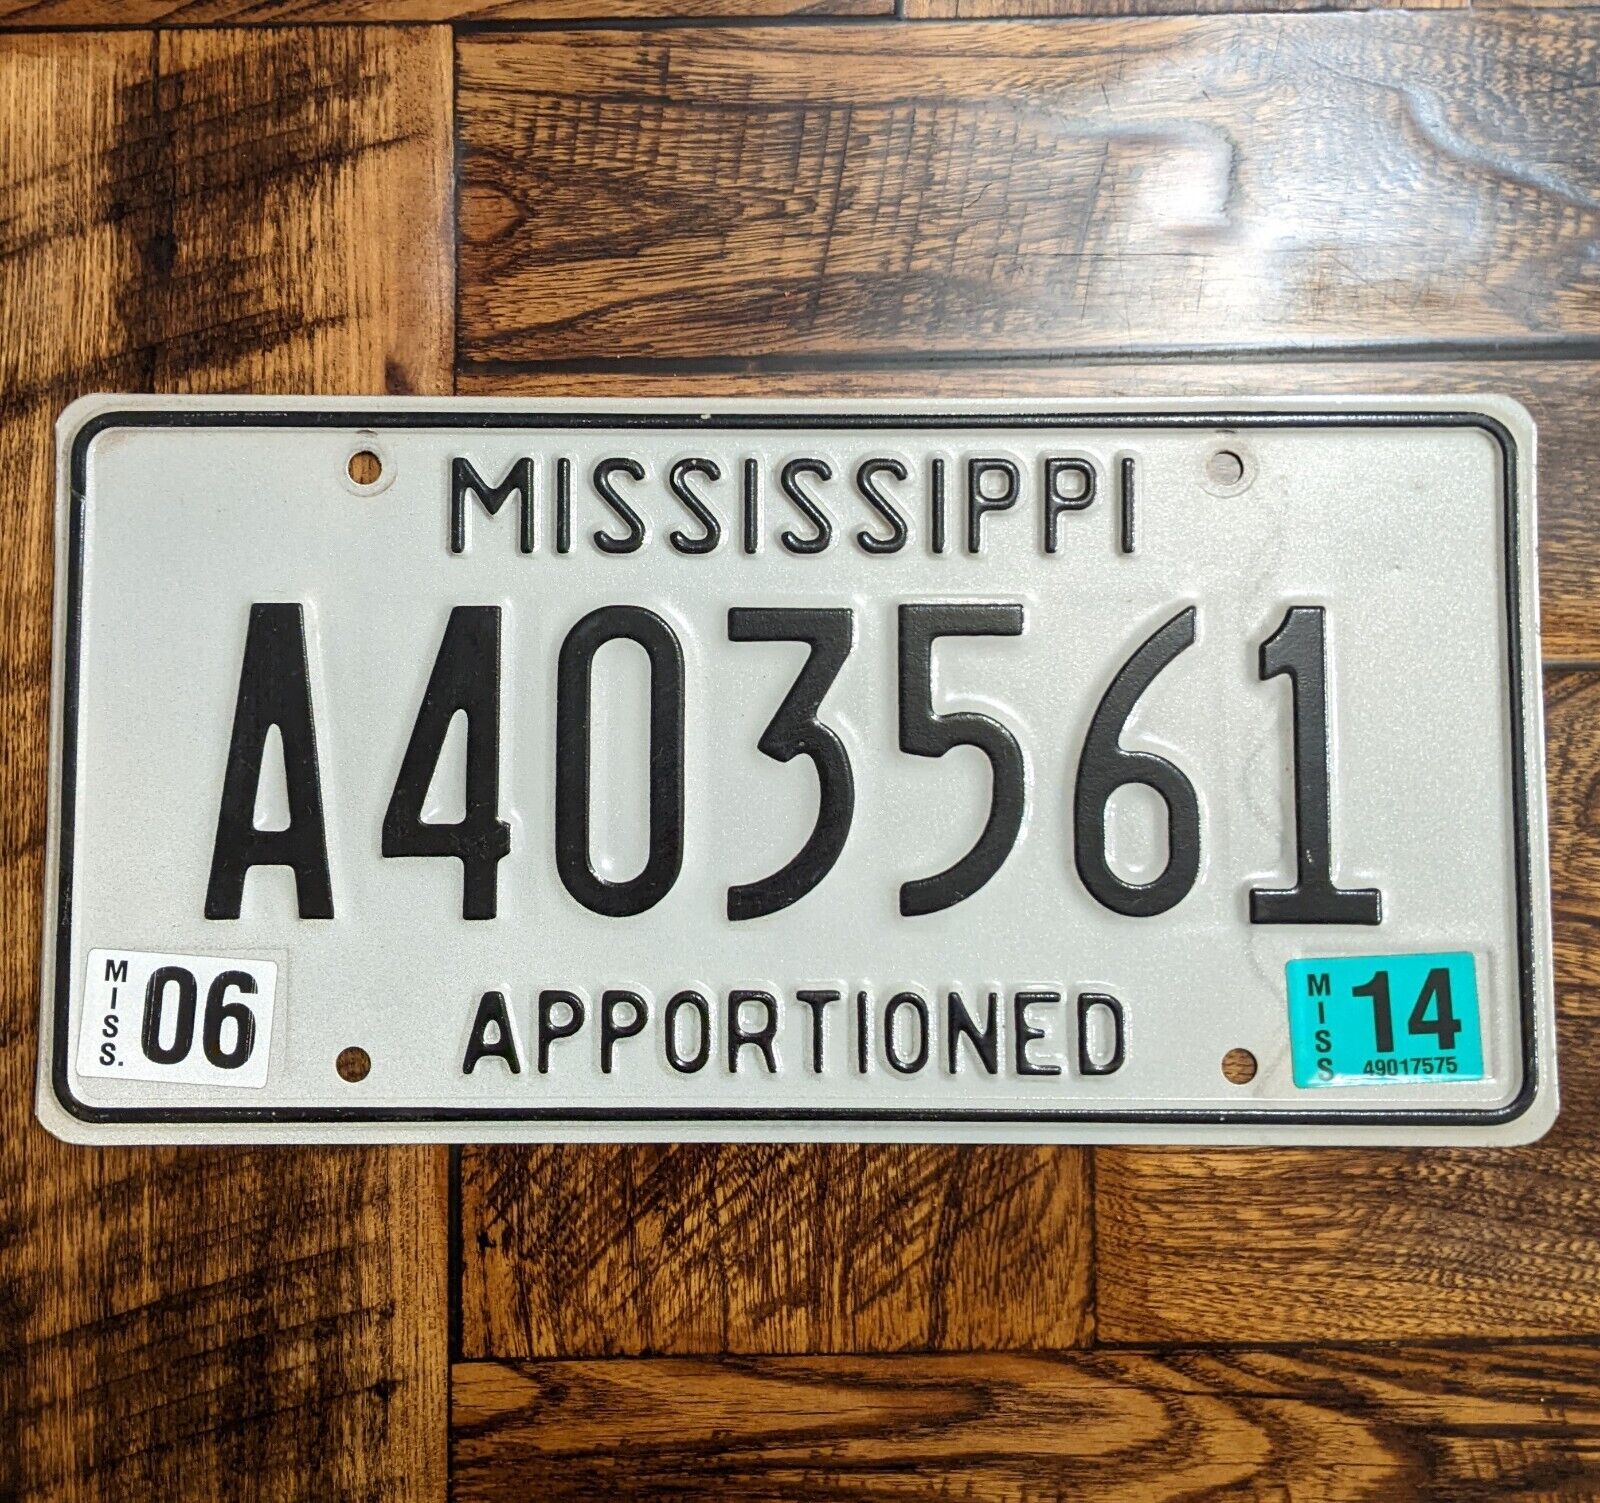 MISSISSIPPI 2014 APPORTIONED Interstate Truck License Plate #A403561